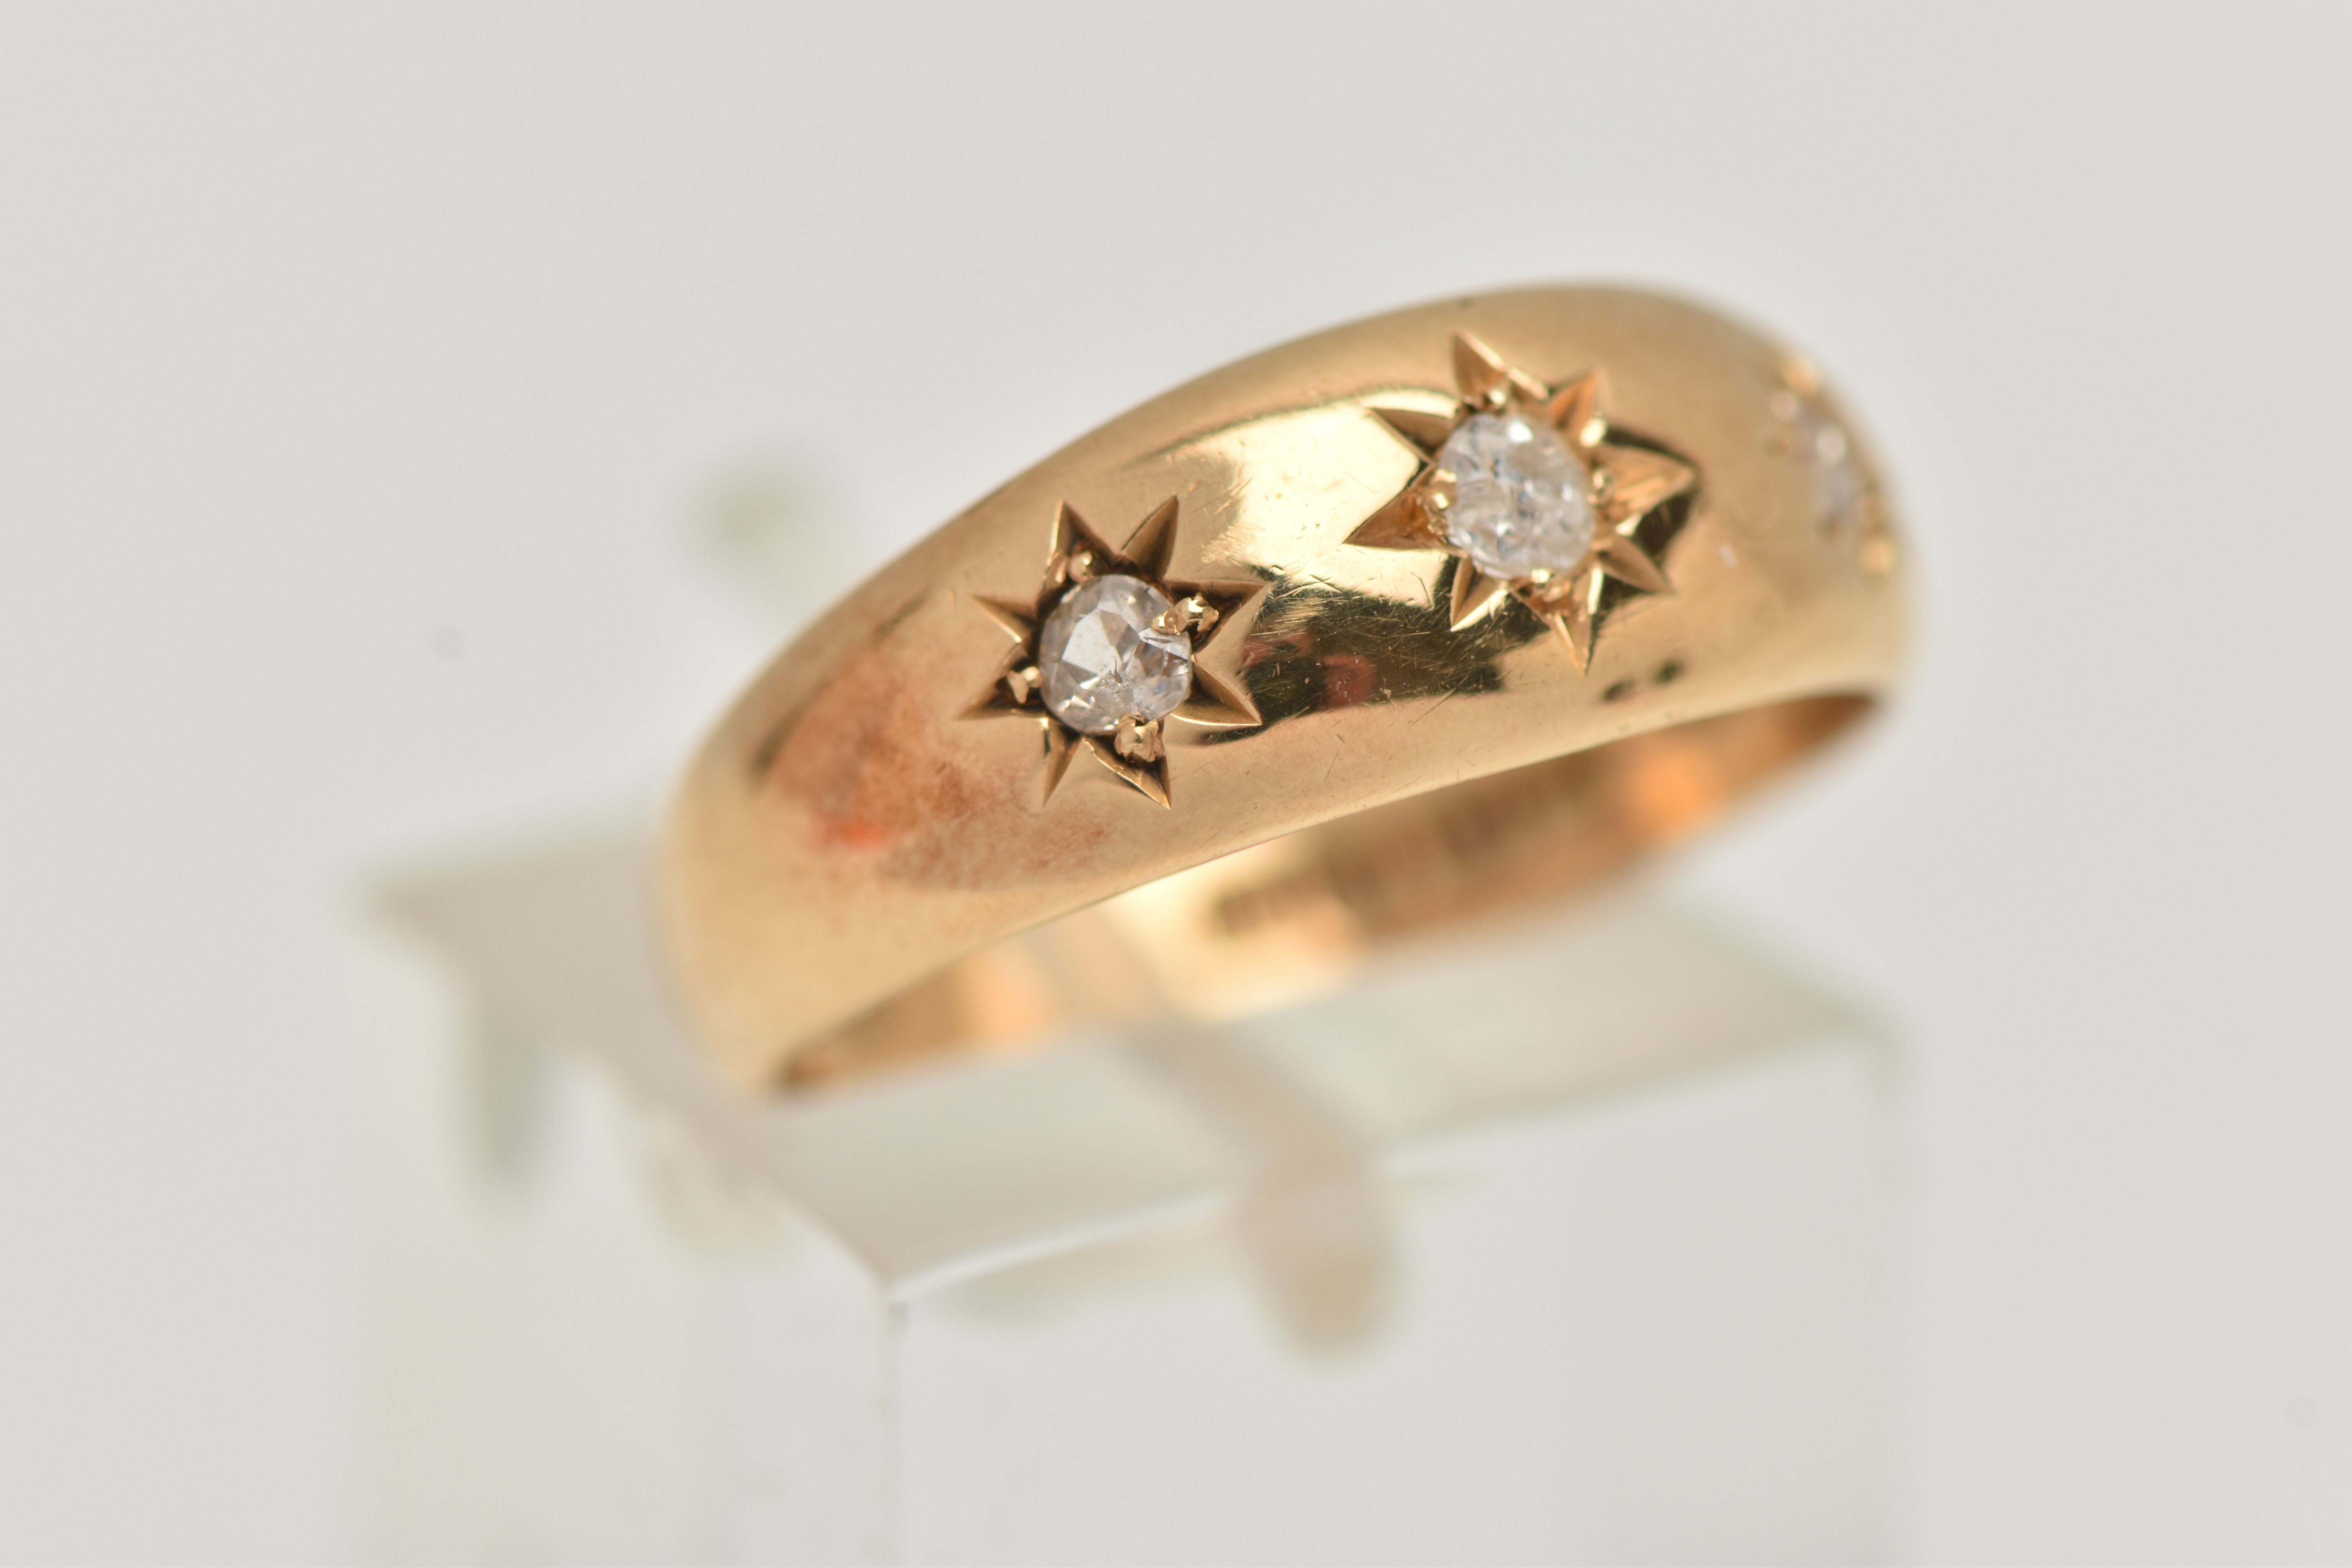 AN EARLY 20TH CENTURY 18CT YELLOW GOLD DIAMOND THREE STONE RING, set with graduating old European - Image 4 of 4